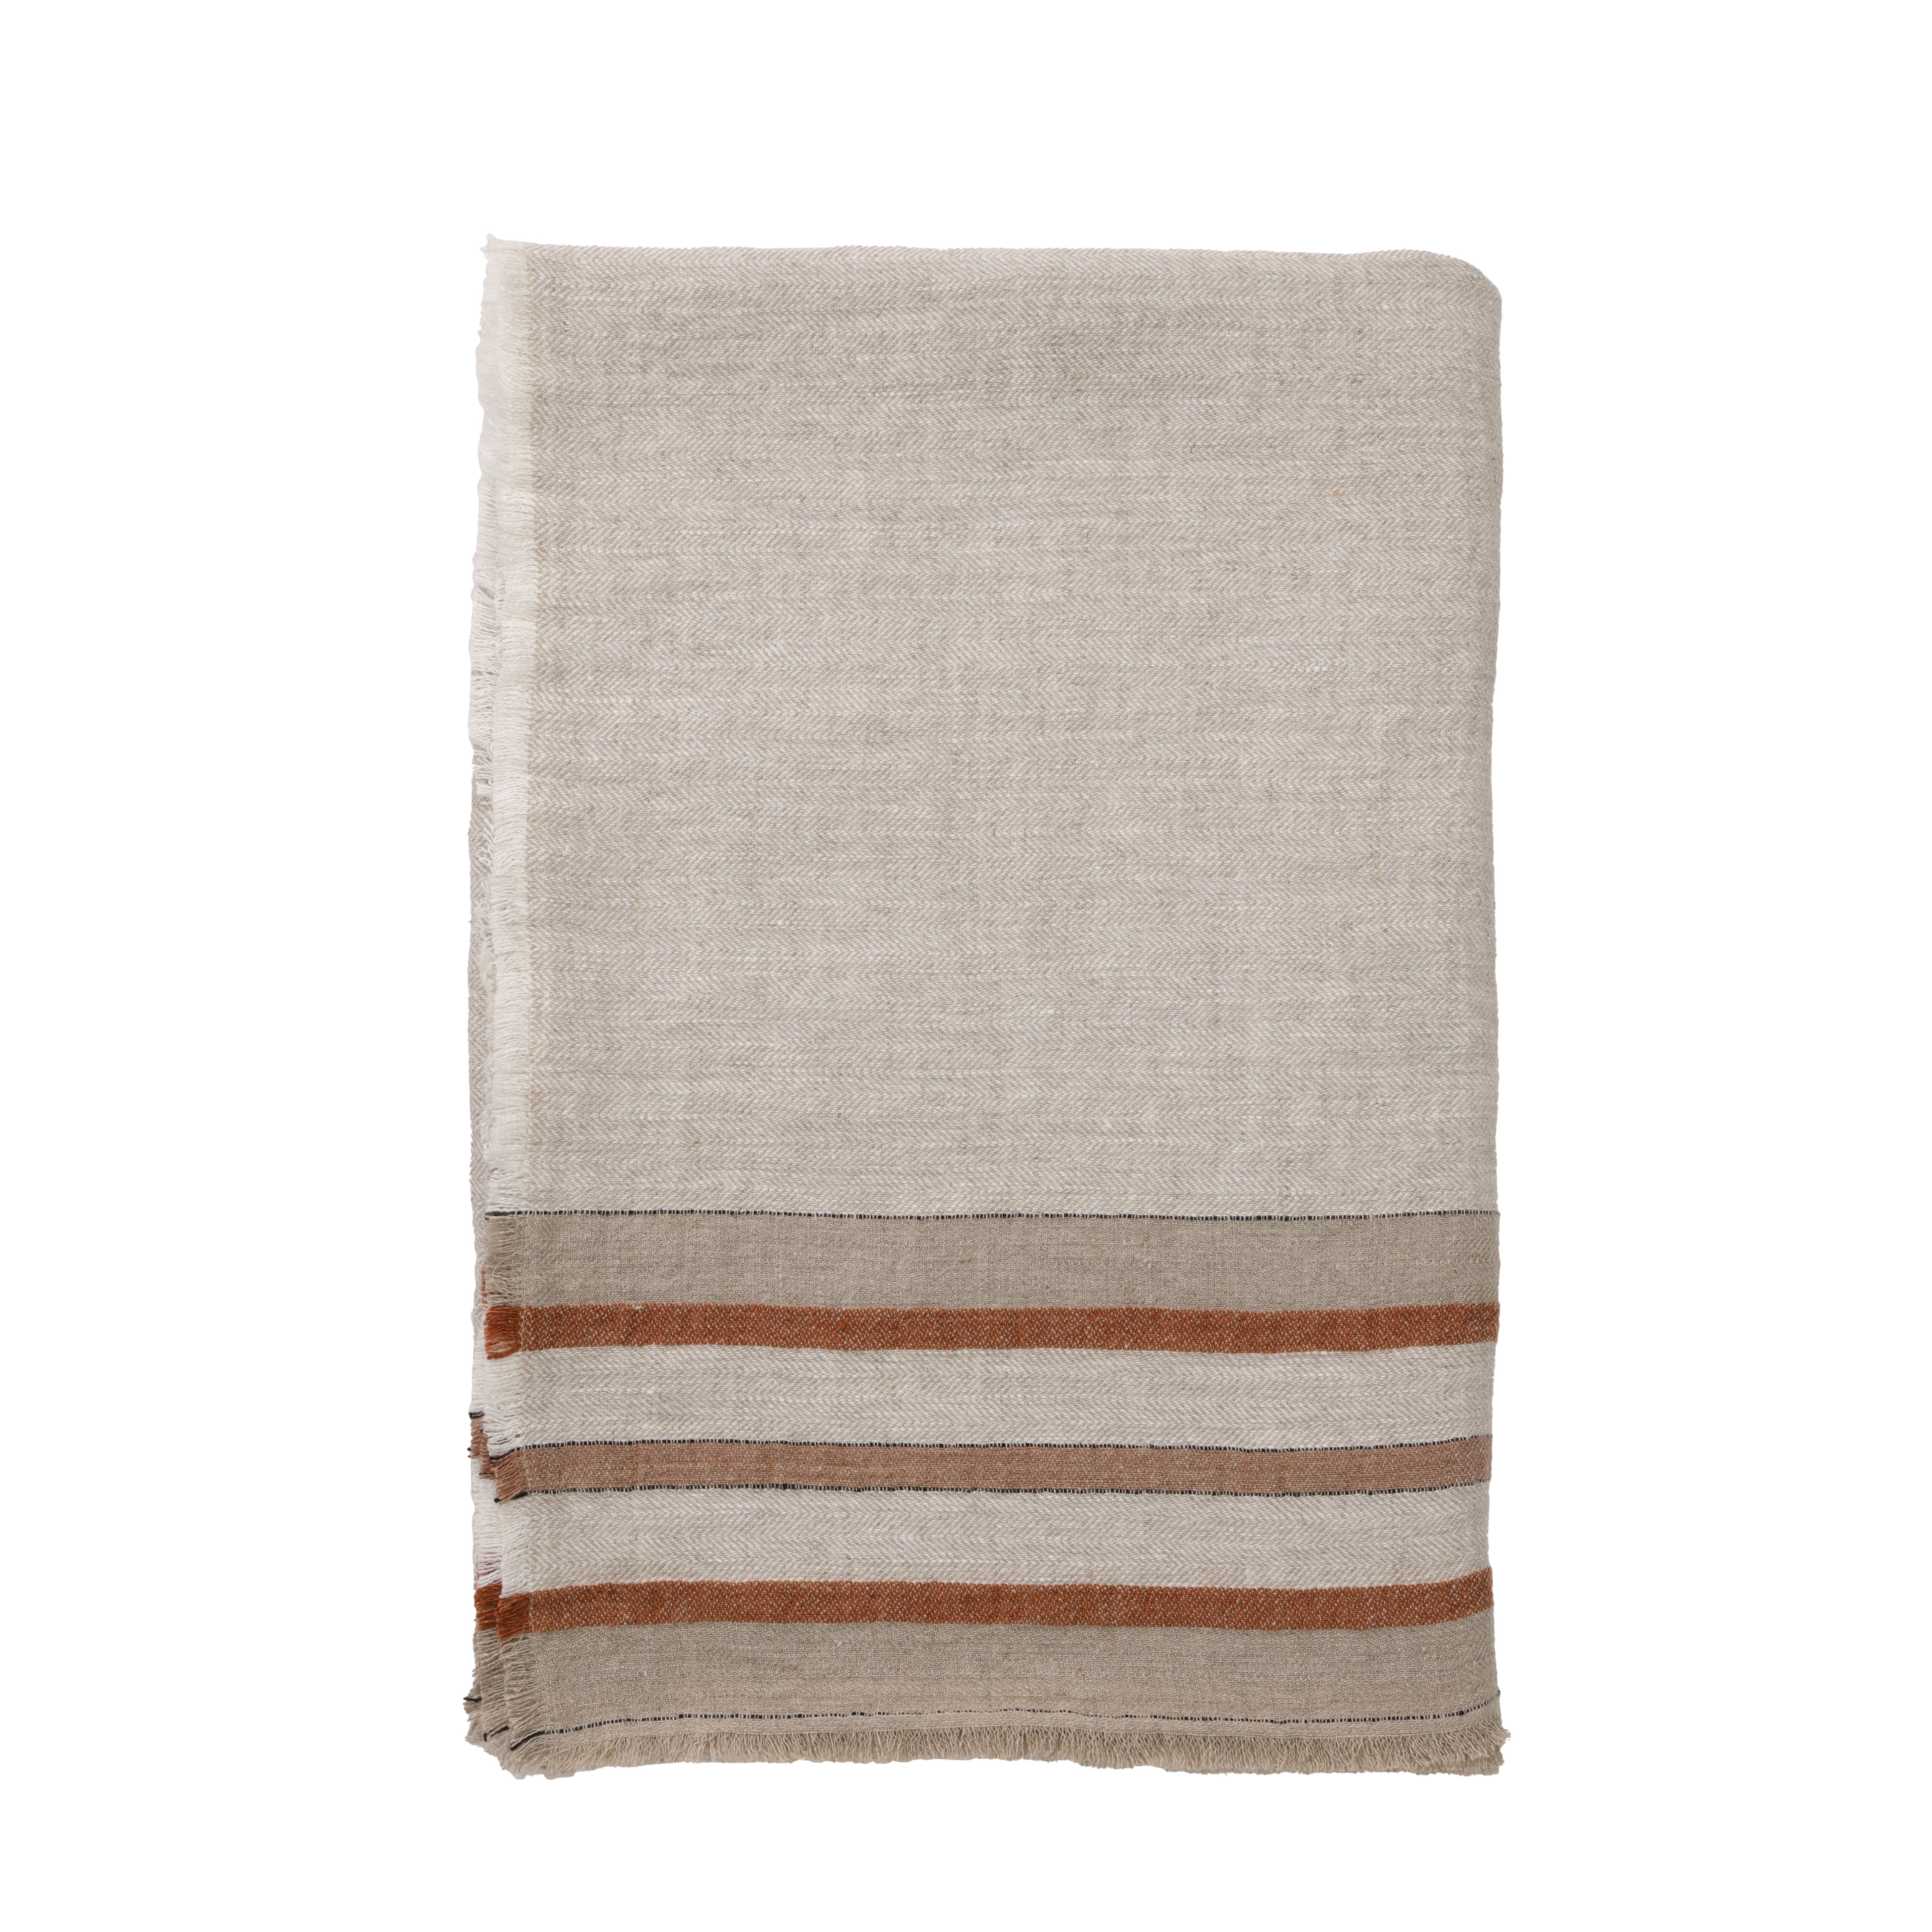 pompom at home - beck - oversized throw - natural color